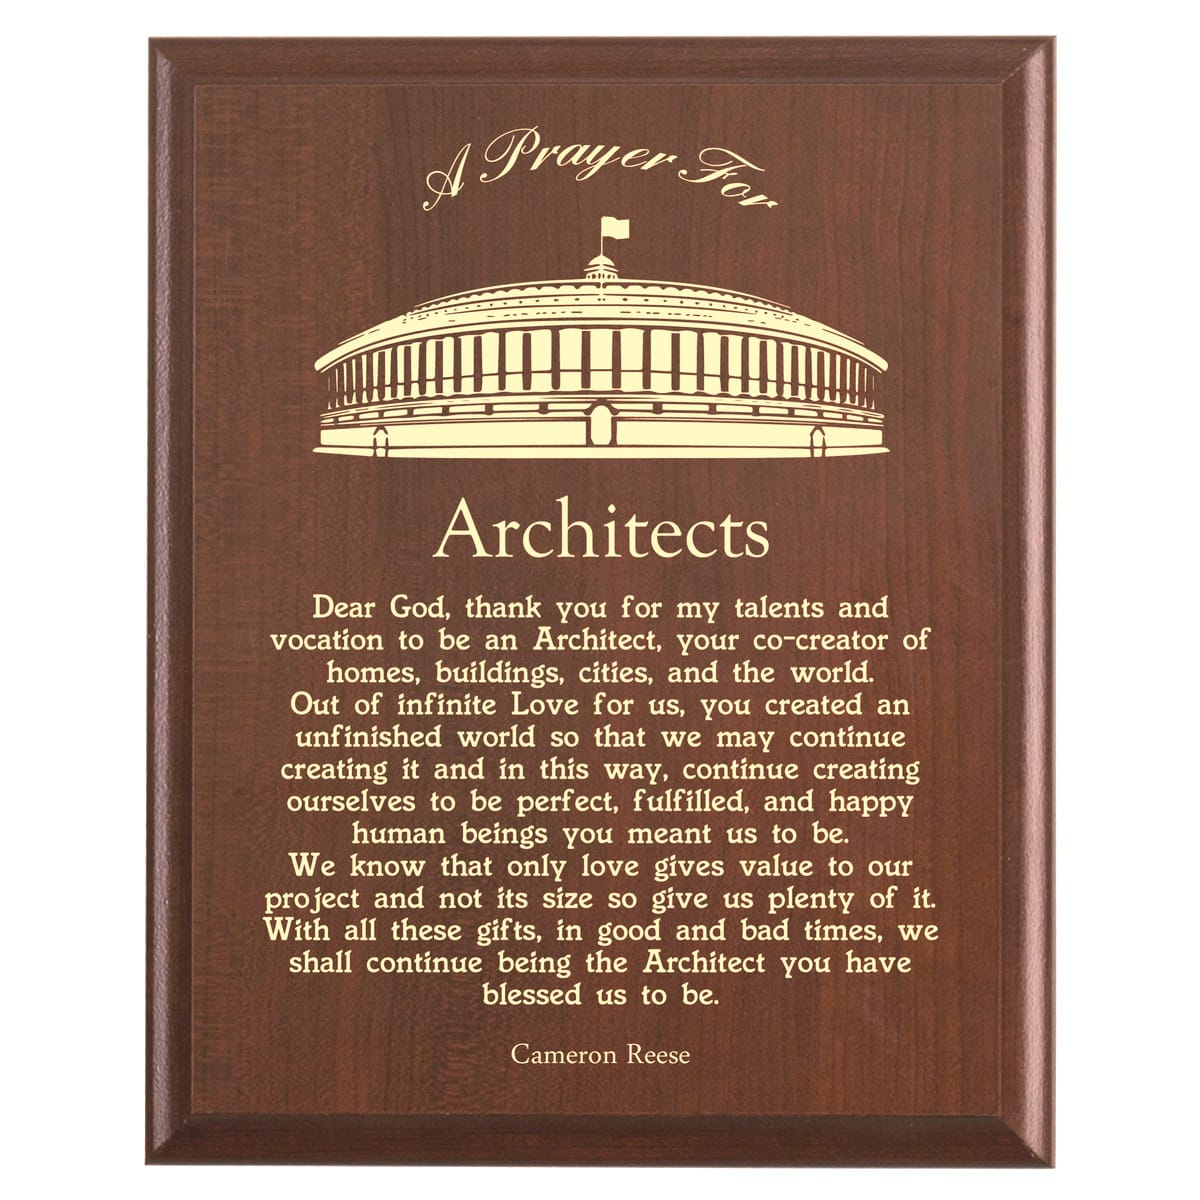 Plaque photo: Architect Prayer Plaque design with free personalization. Wood style finish with customized text.